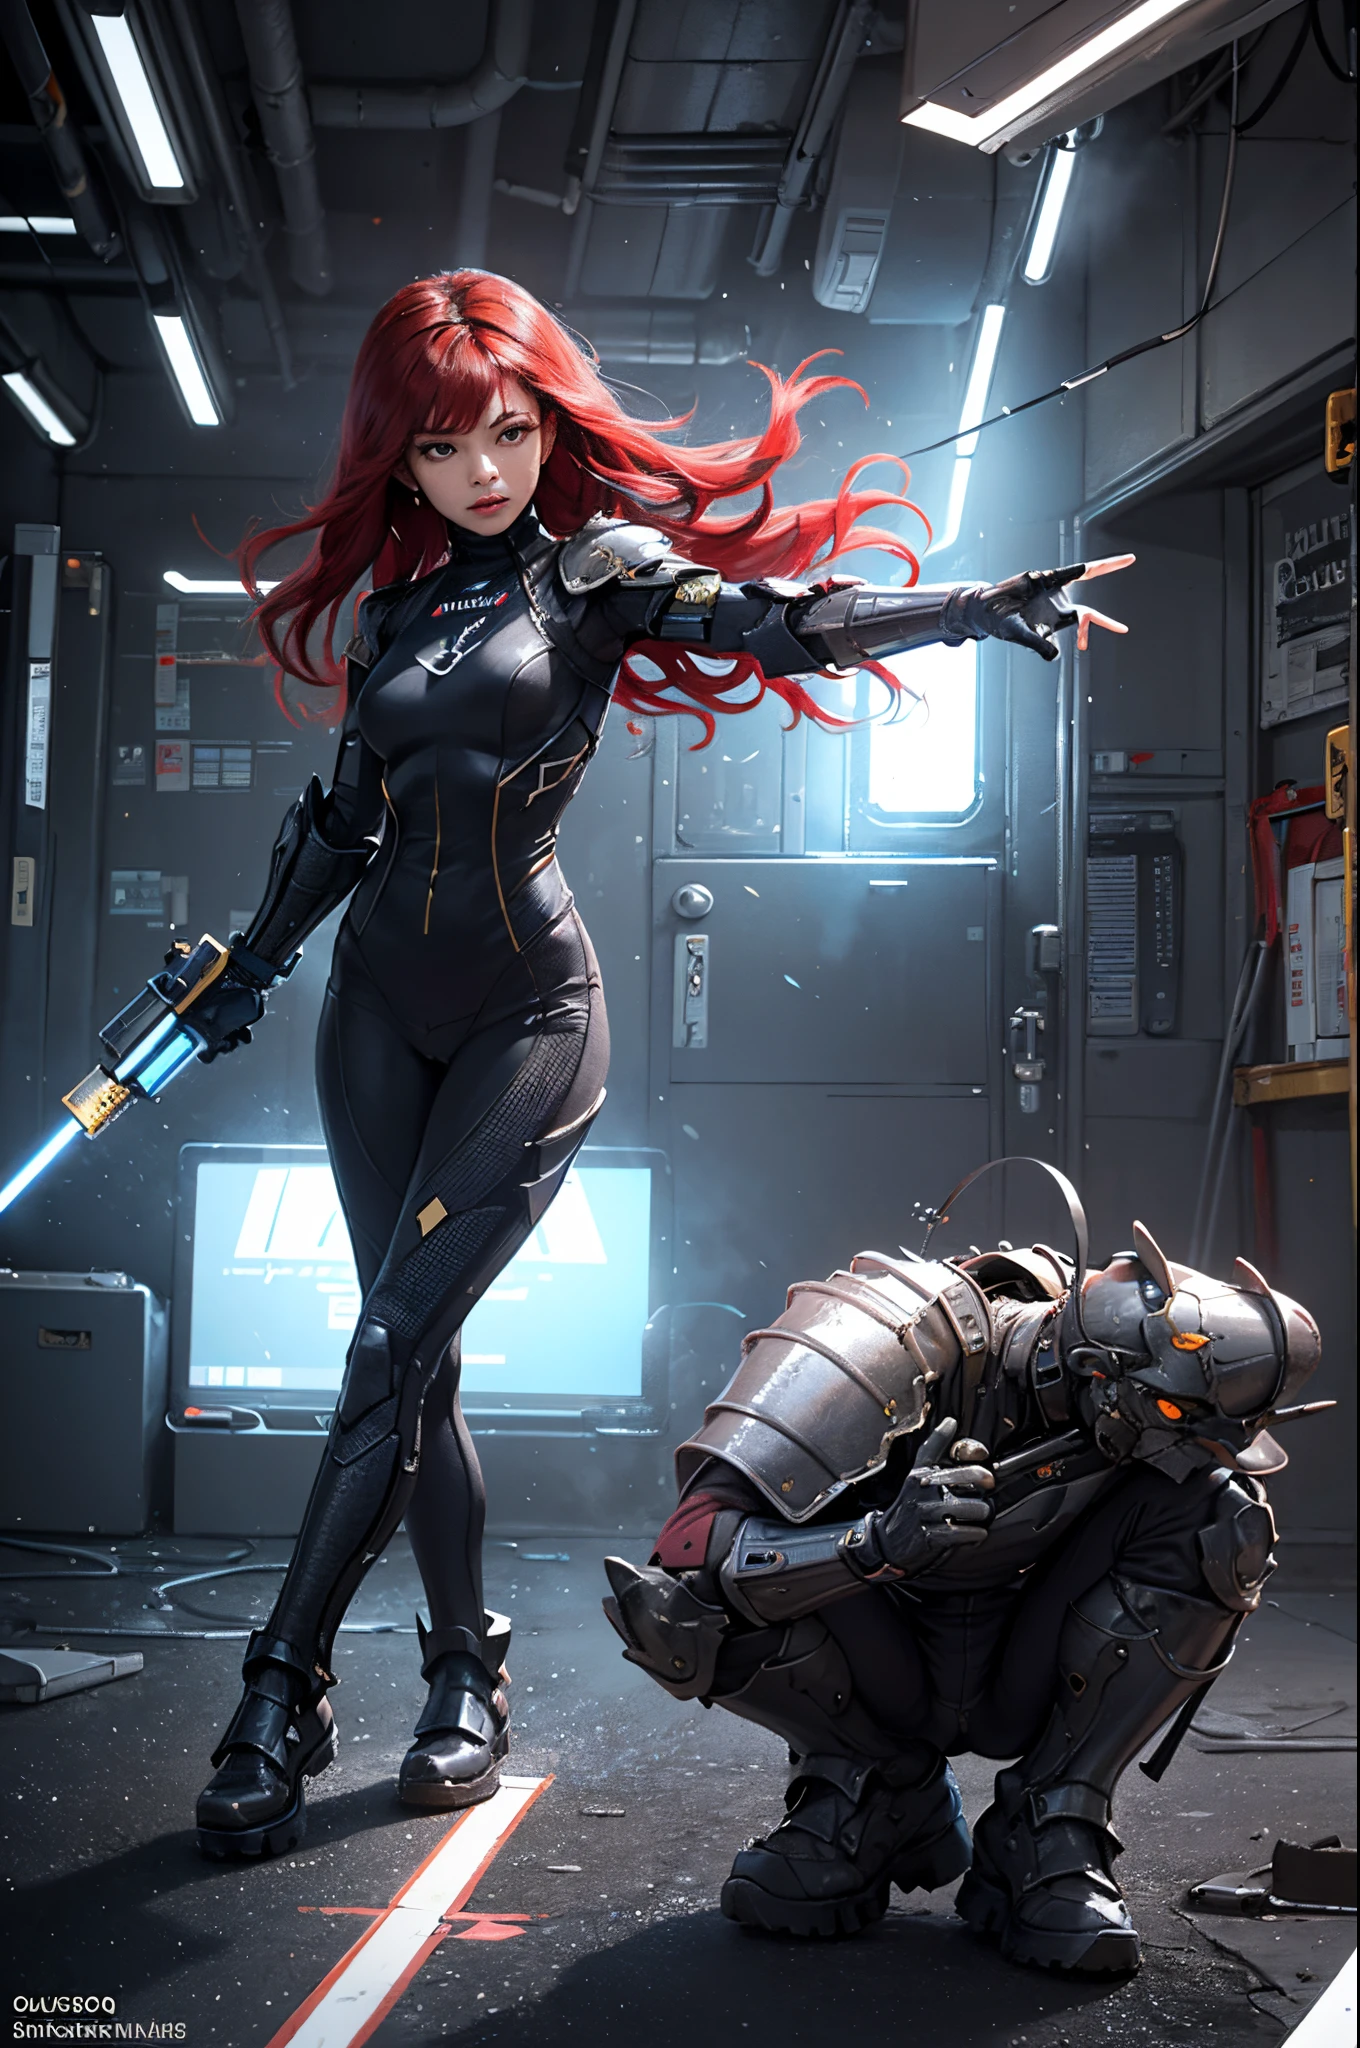 (LATIN woman BODY, WIDE HIPS:1.3), holding gun,((precise fingers, correct fingers, beautiful fingers)),futuristic armor on small chests, 37 year old Asian woman, dynamic poses,red hair, asian eyes, equipment strap on the waist, gun on the hip, (bodysuit :1.2), (machanical armor gloves:1.3),female cybersuits,(mechanical armor leggins:1.2), mechanical, electricity, elaborate detail,armor in cyberpunk style, female cyborg.diverse cybersuits
battle field, Full shot, plano integral fotografia, low angle camera,